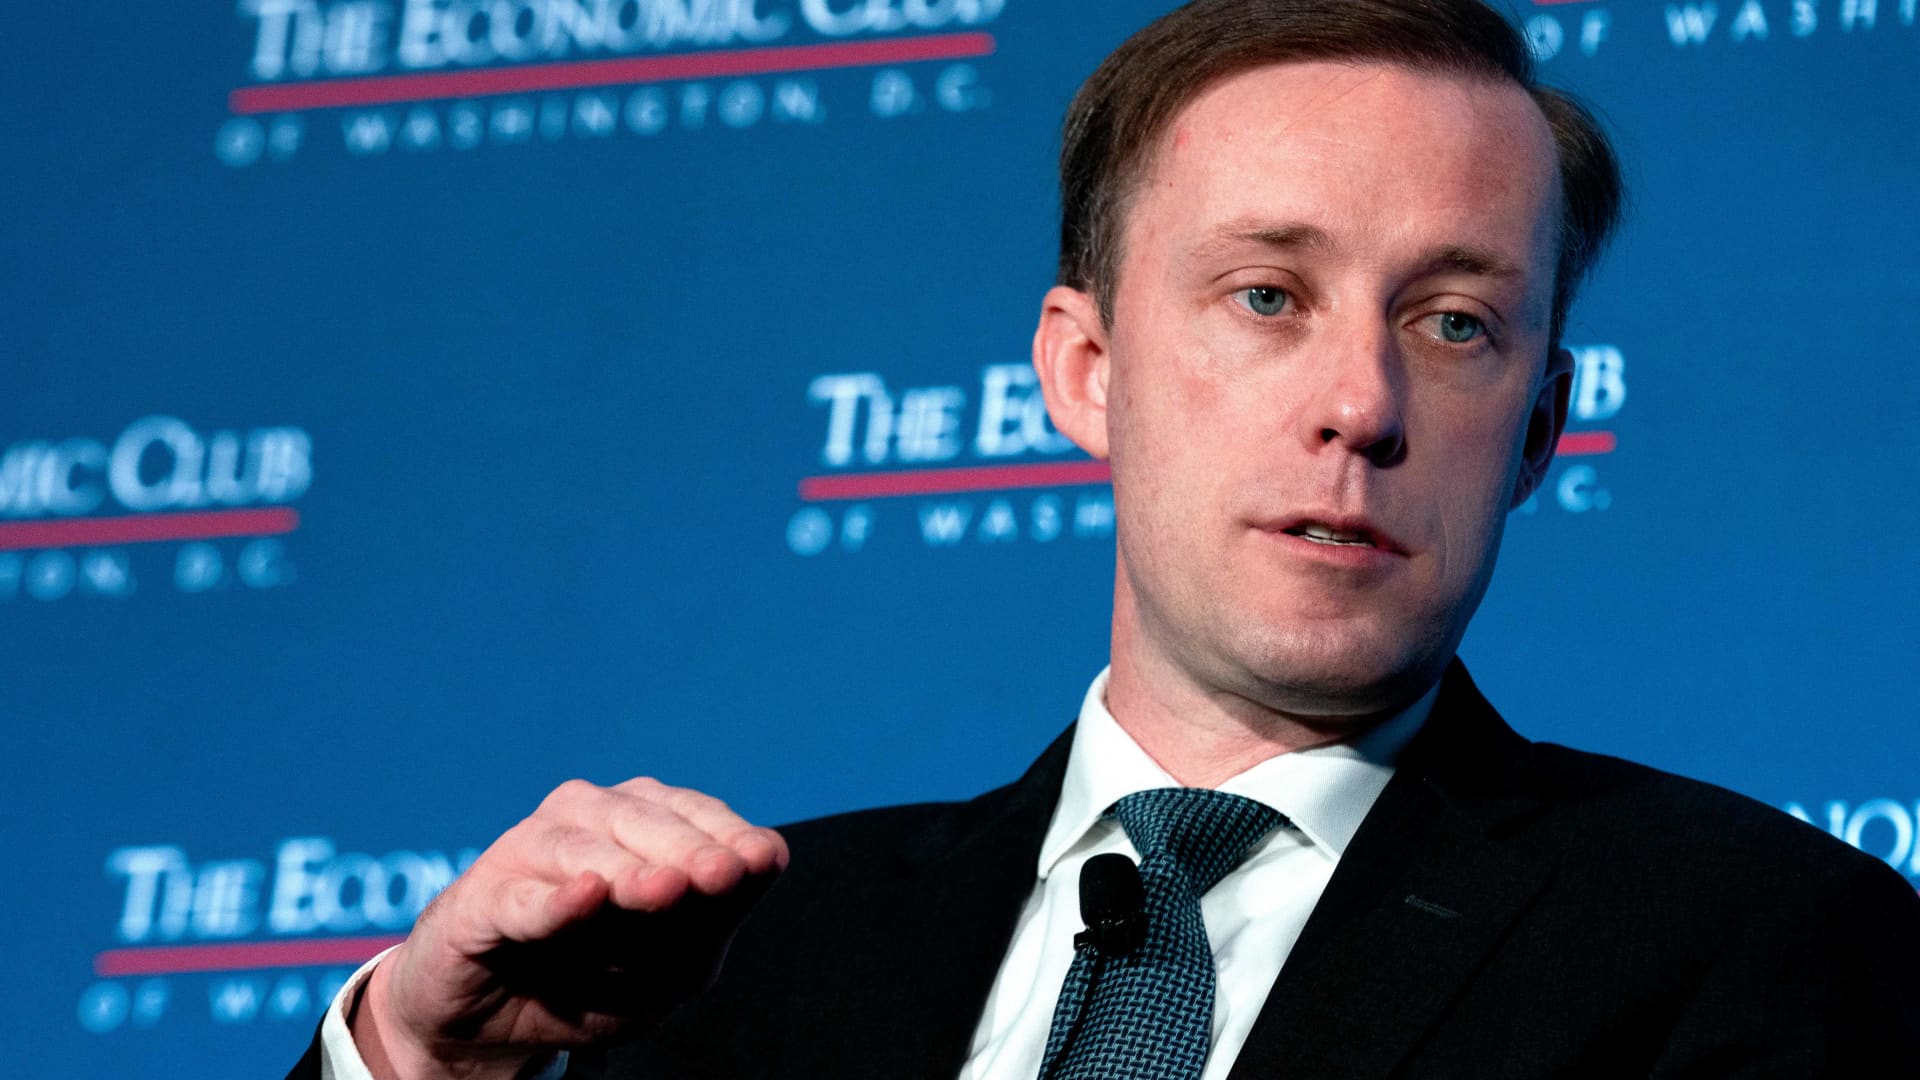 National Security Advisor Jake Sullivan participates in a conversation with David Rubenstein, Chairman of the Economic Club, at the JW Marriott Hotel in Washington, DC, on April 14, 2022.